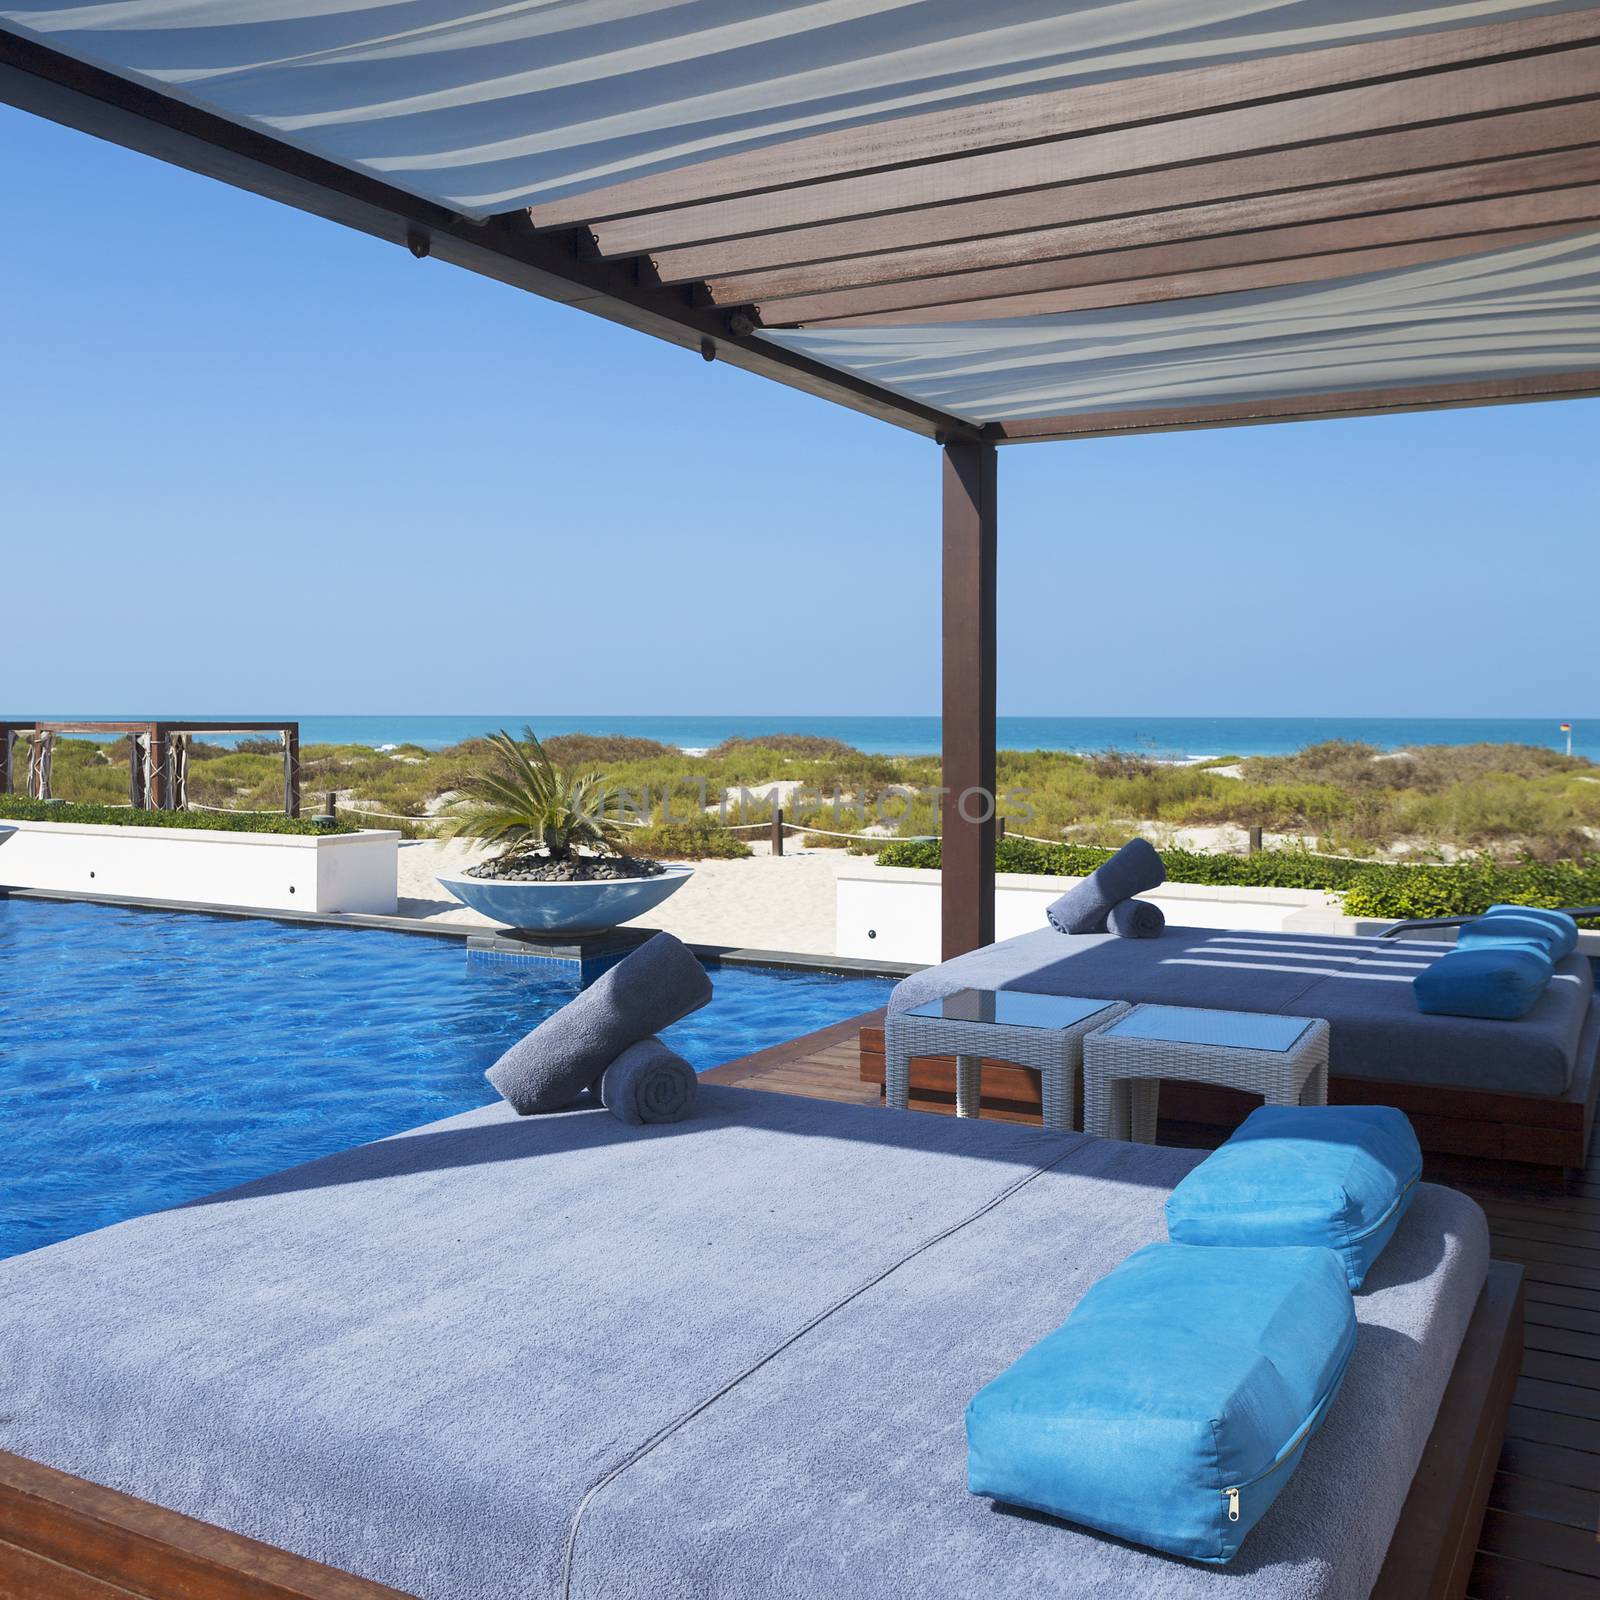 Bed near swimming pool and beach.